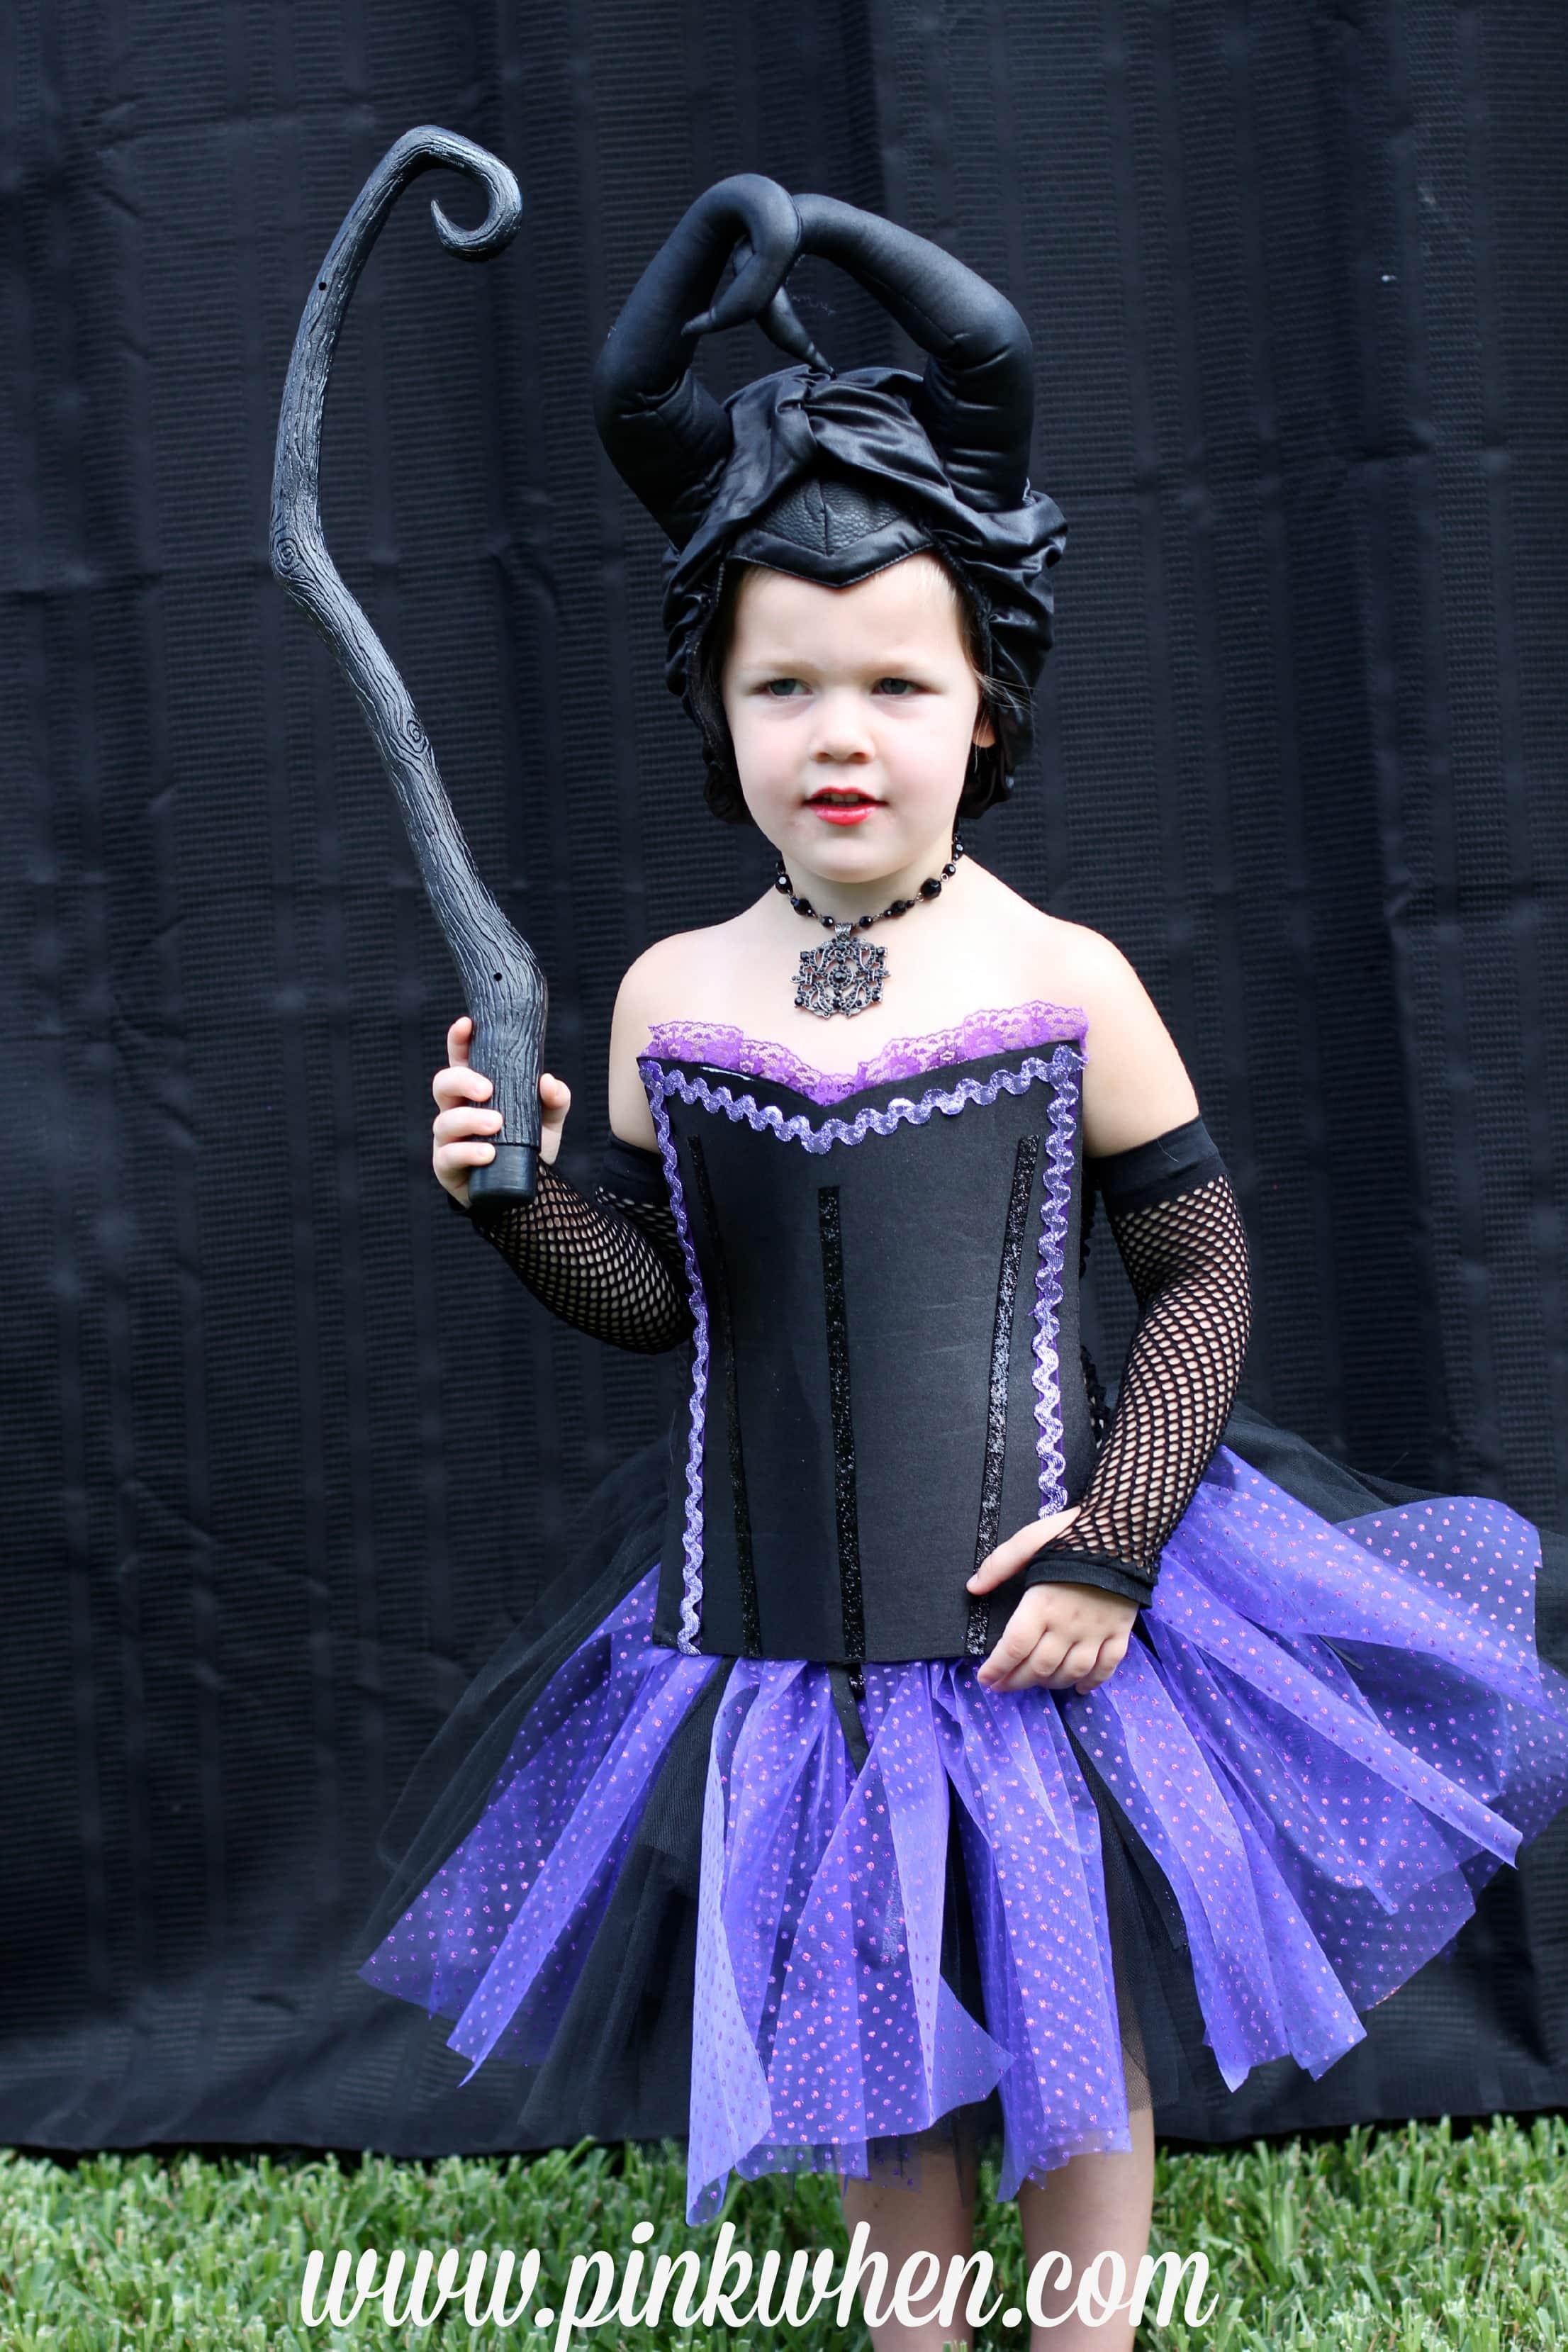 DIY Maleficent Costume
 DIY No Sew Maleficent Costume Page 2 of 2 PinkWhen